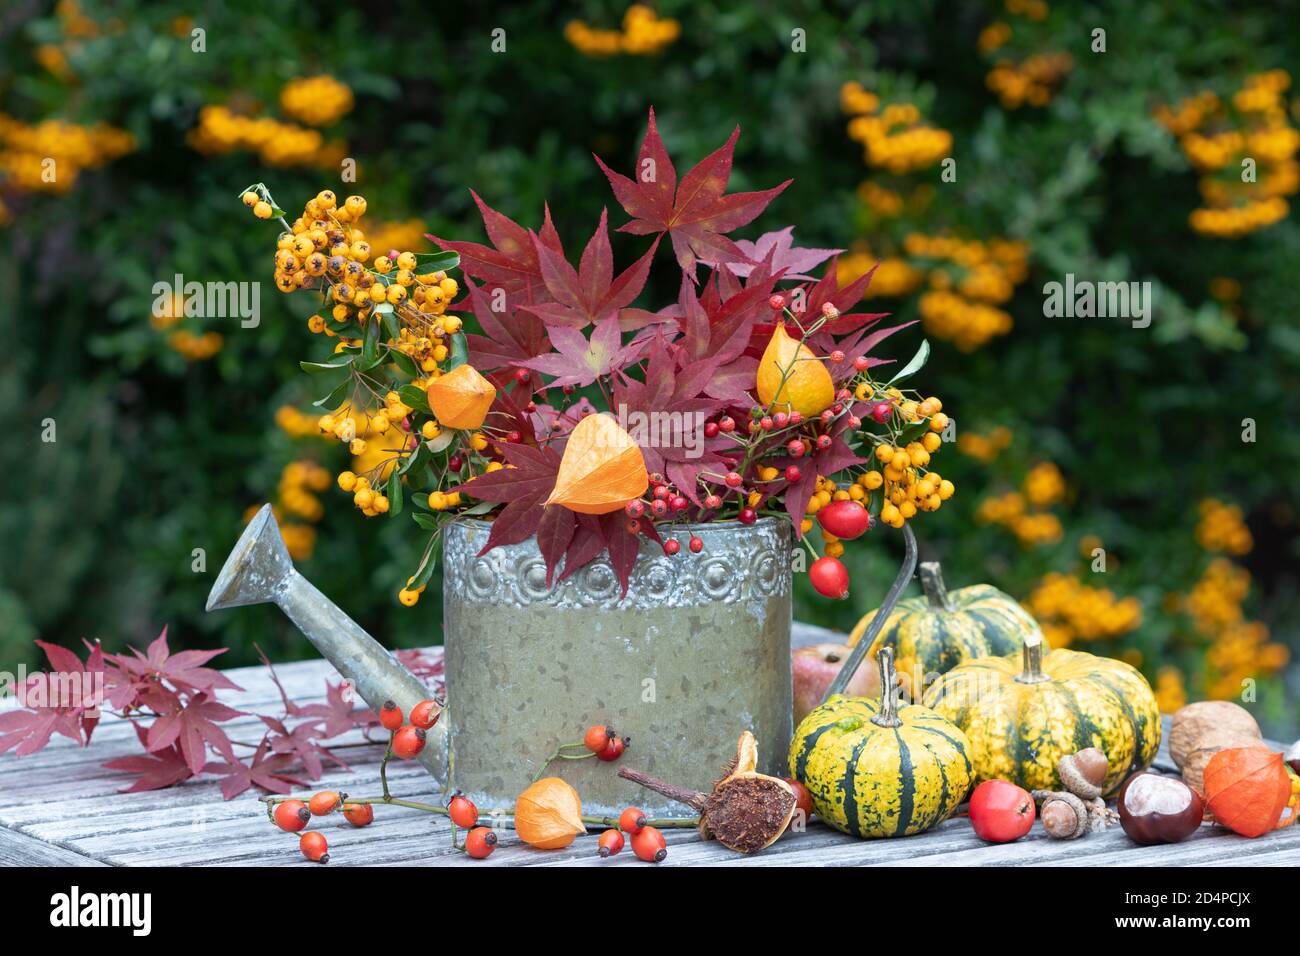 bouquet of physalis, maple leaves and firethorn berries in autumn garden Stock Photo